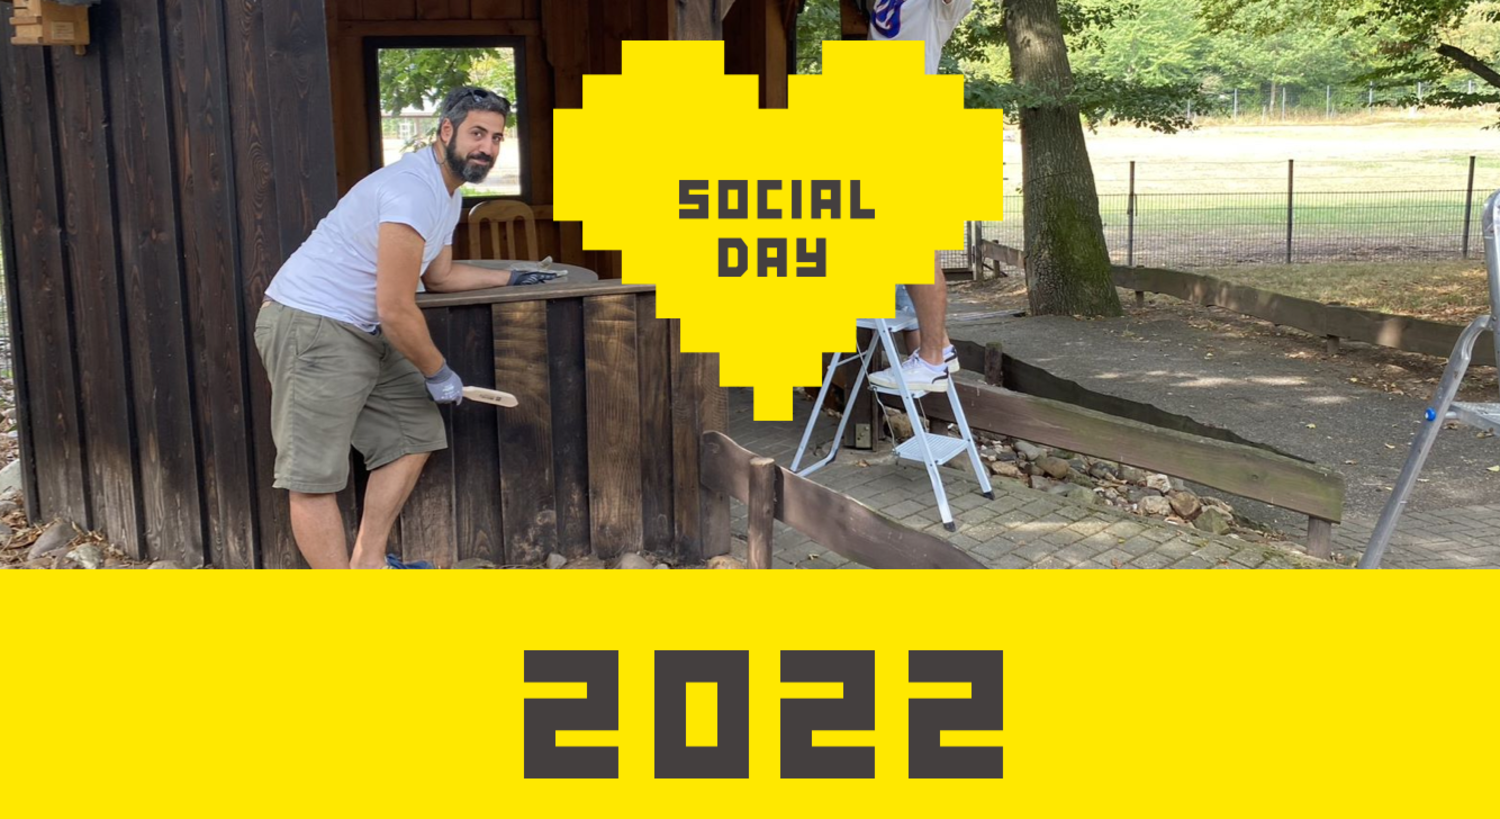 Cologne Intelligence Social Day 2022